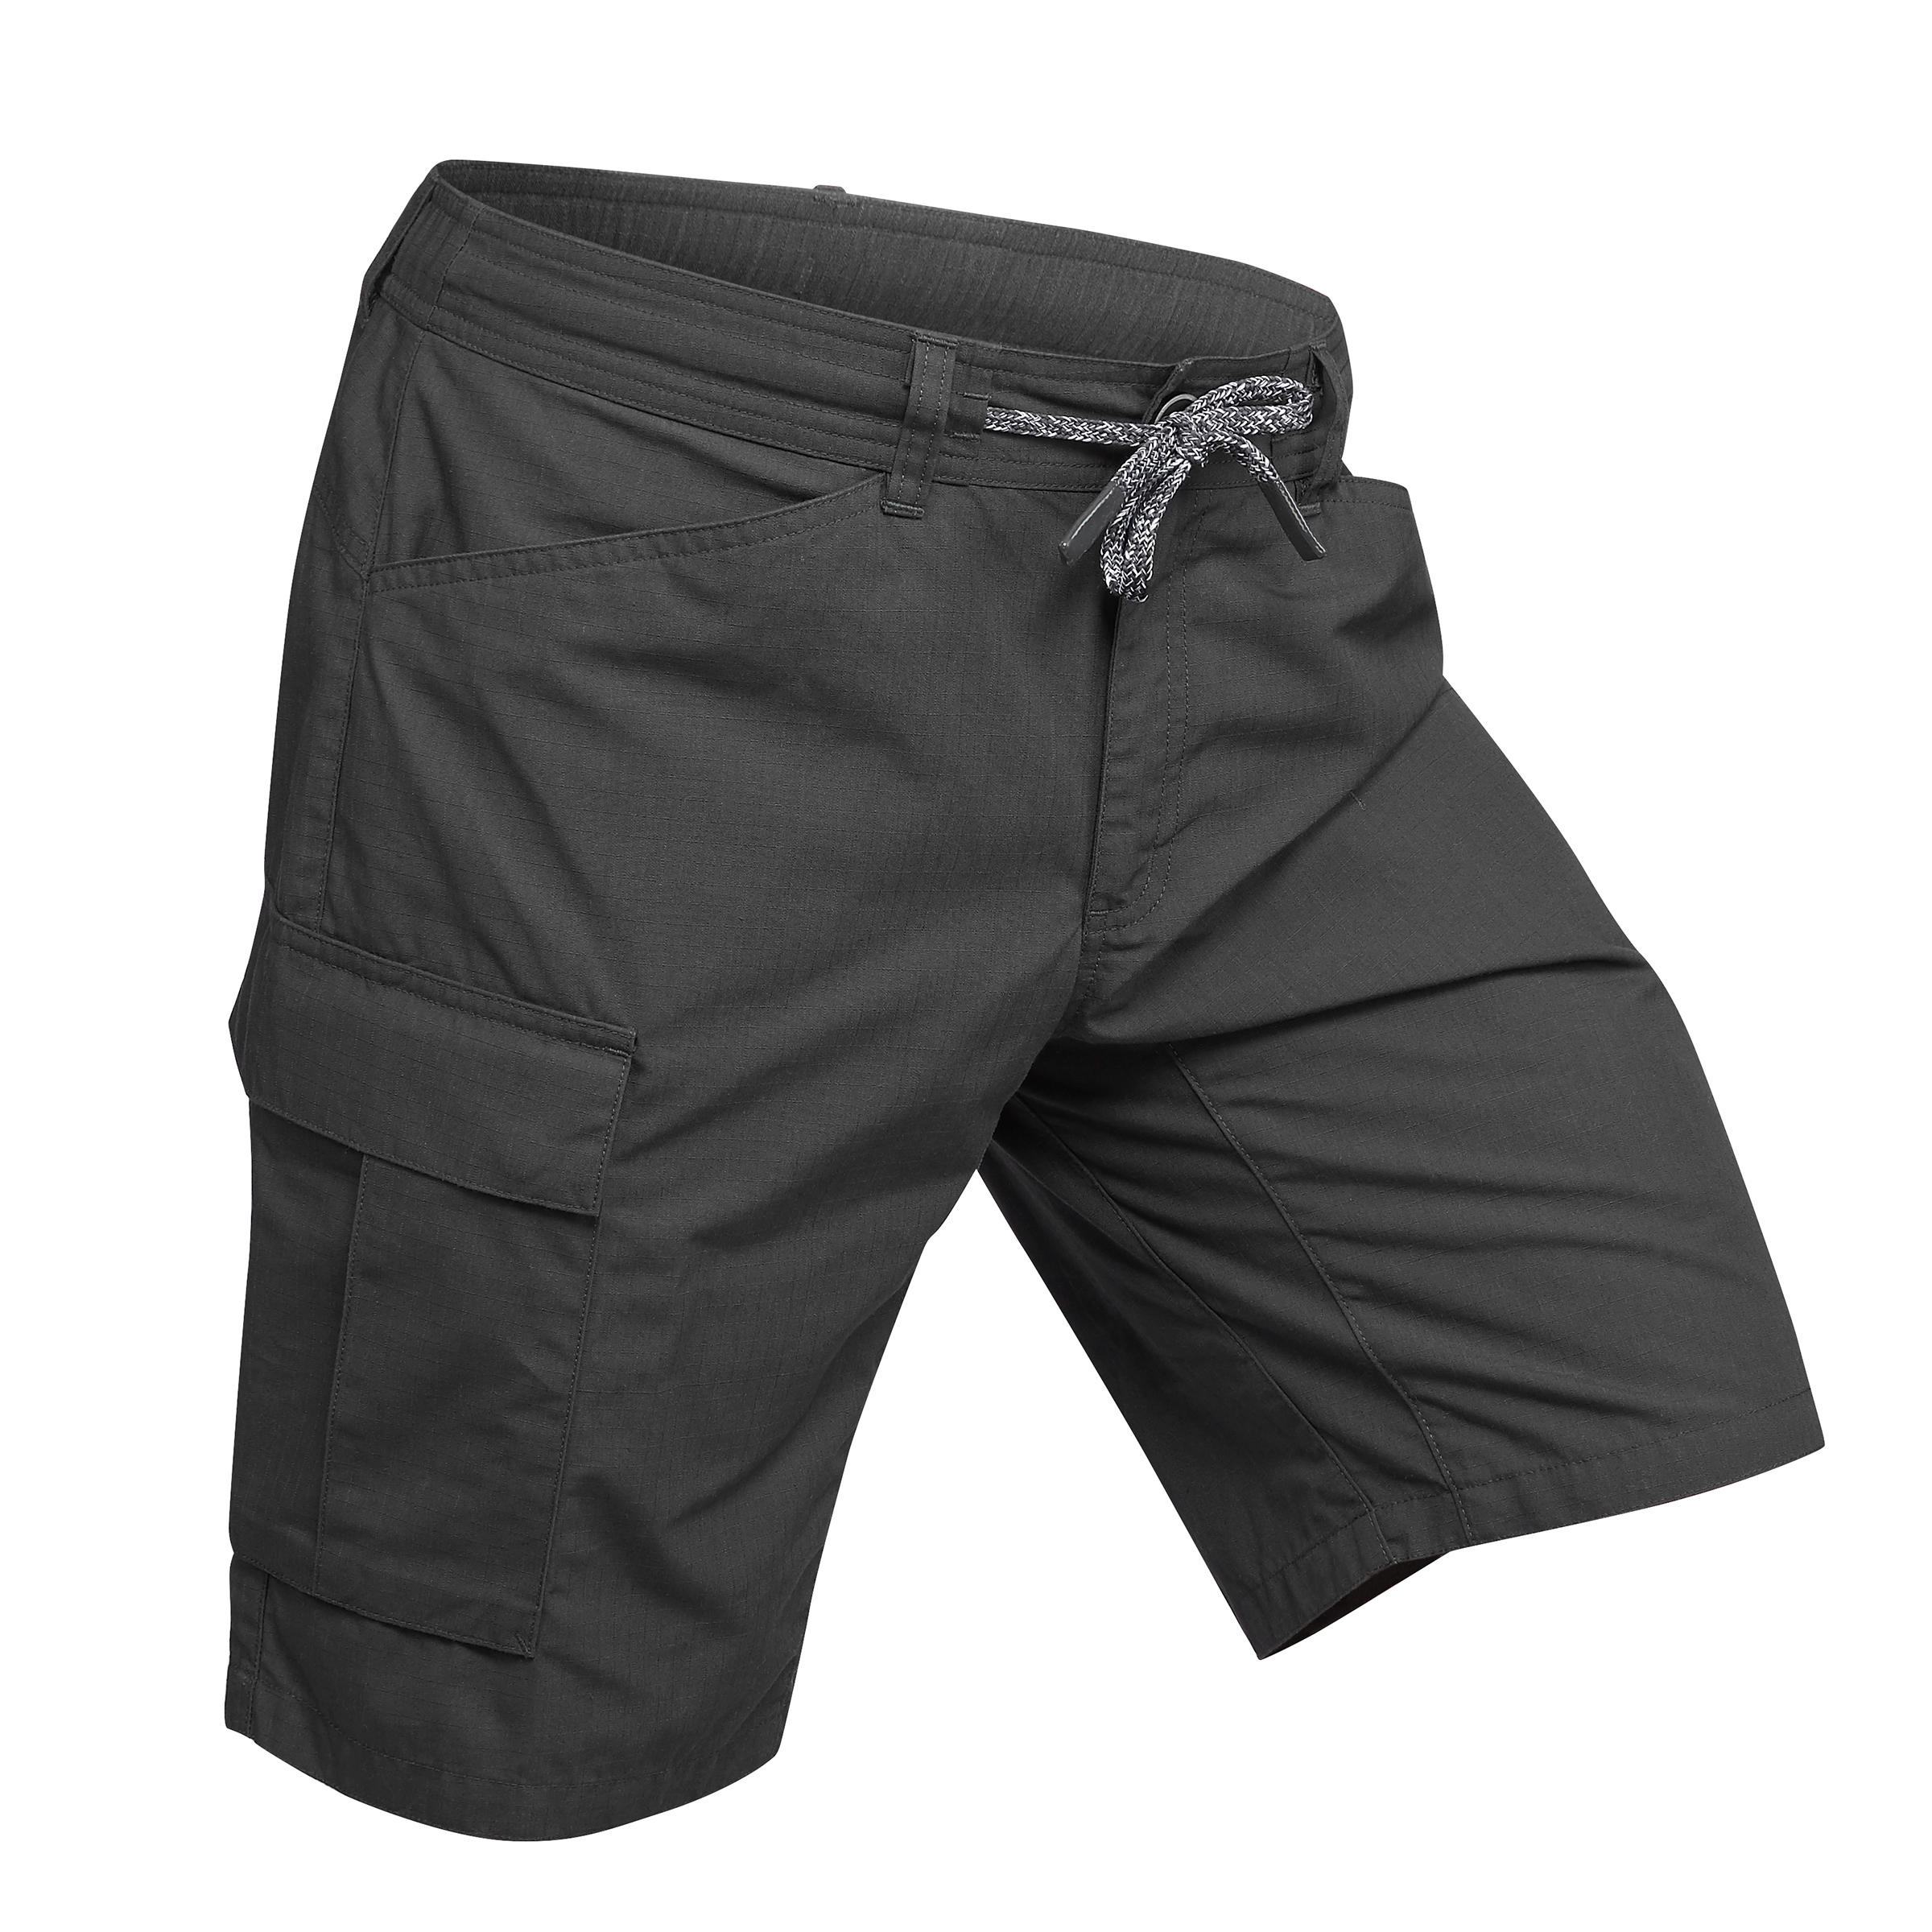 Grey Men Travel shorts by Forclaz by 